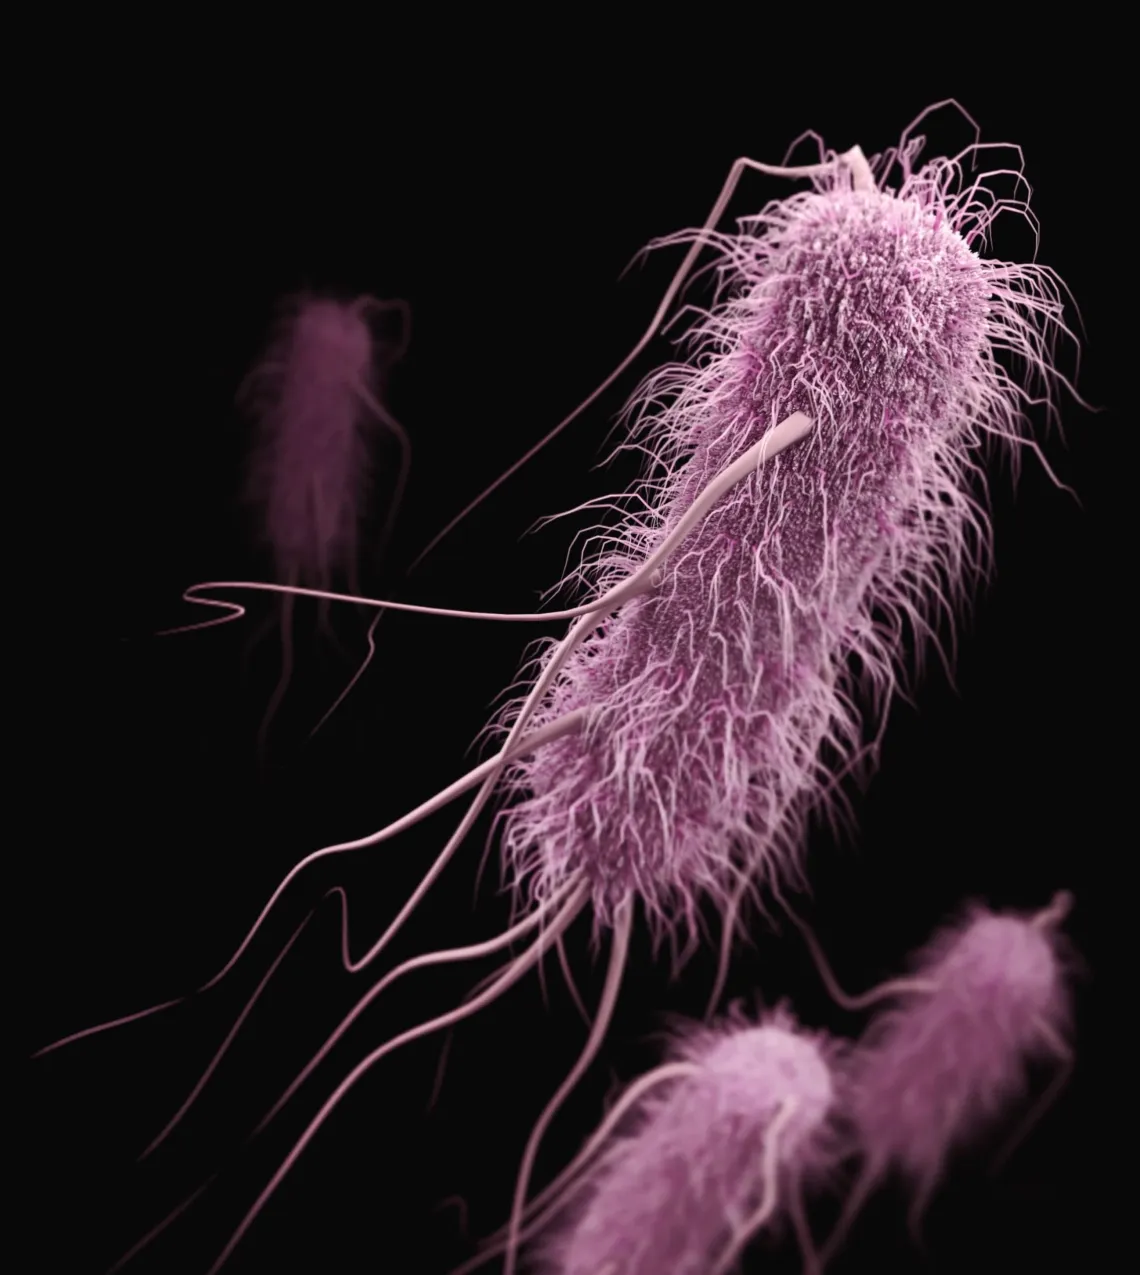 Your Gut Microbes Affect Your Brain